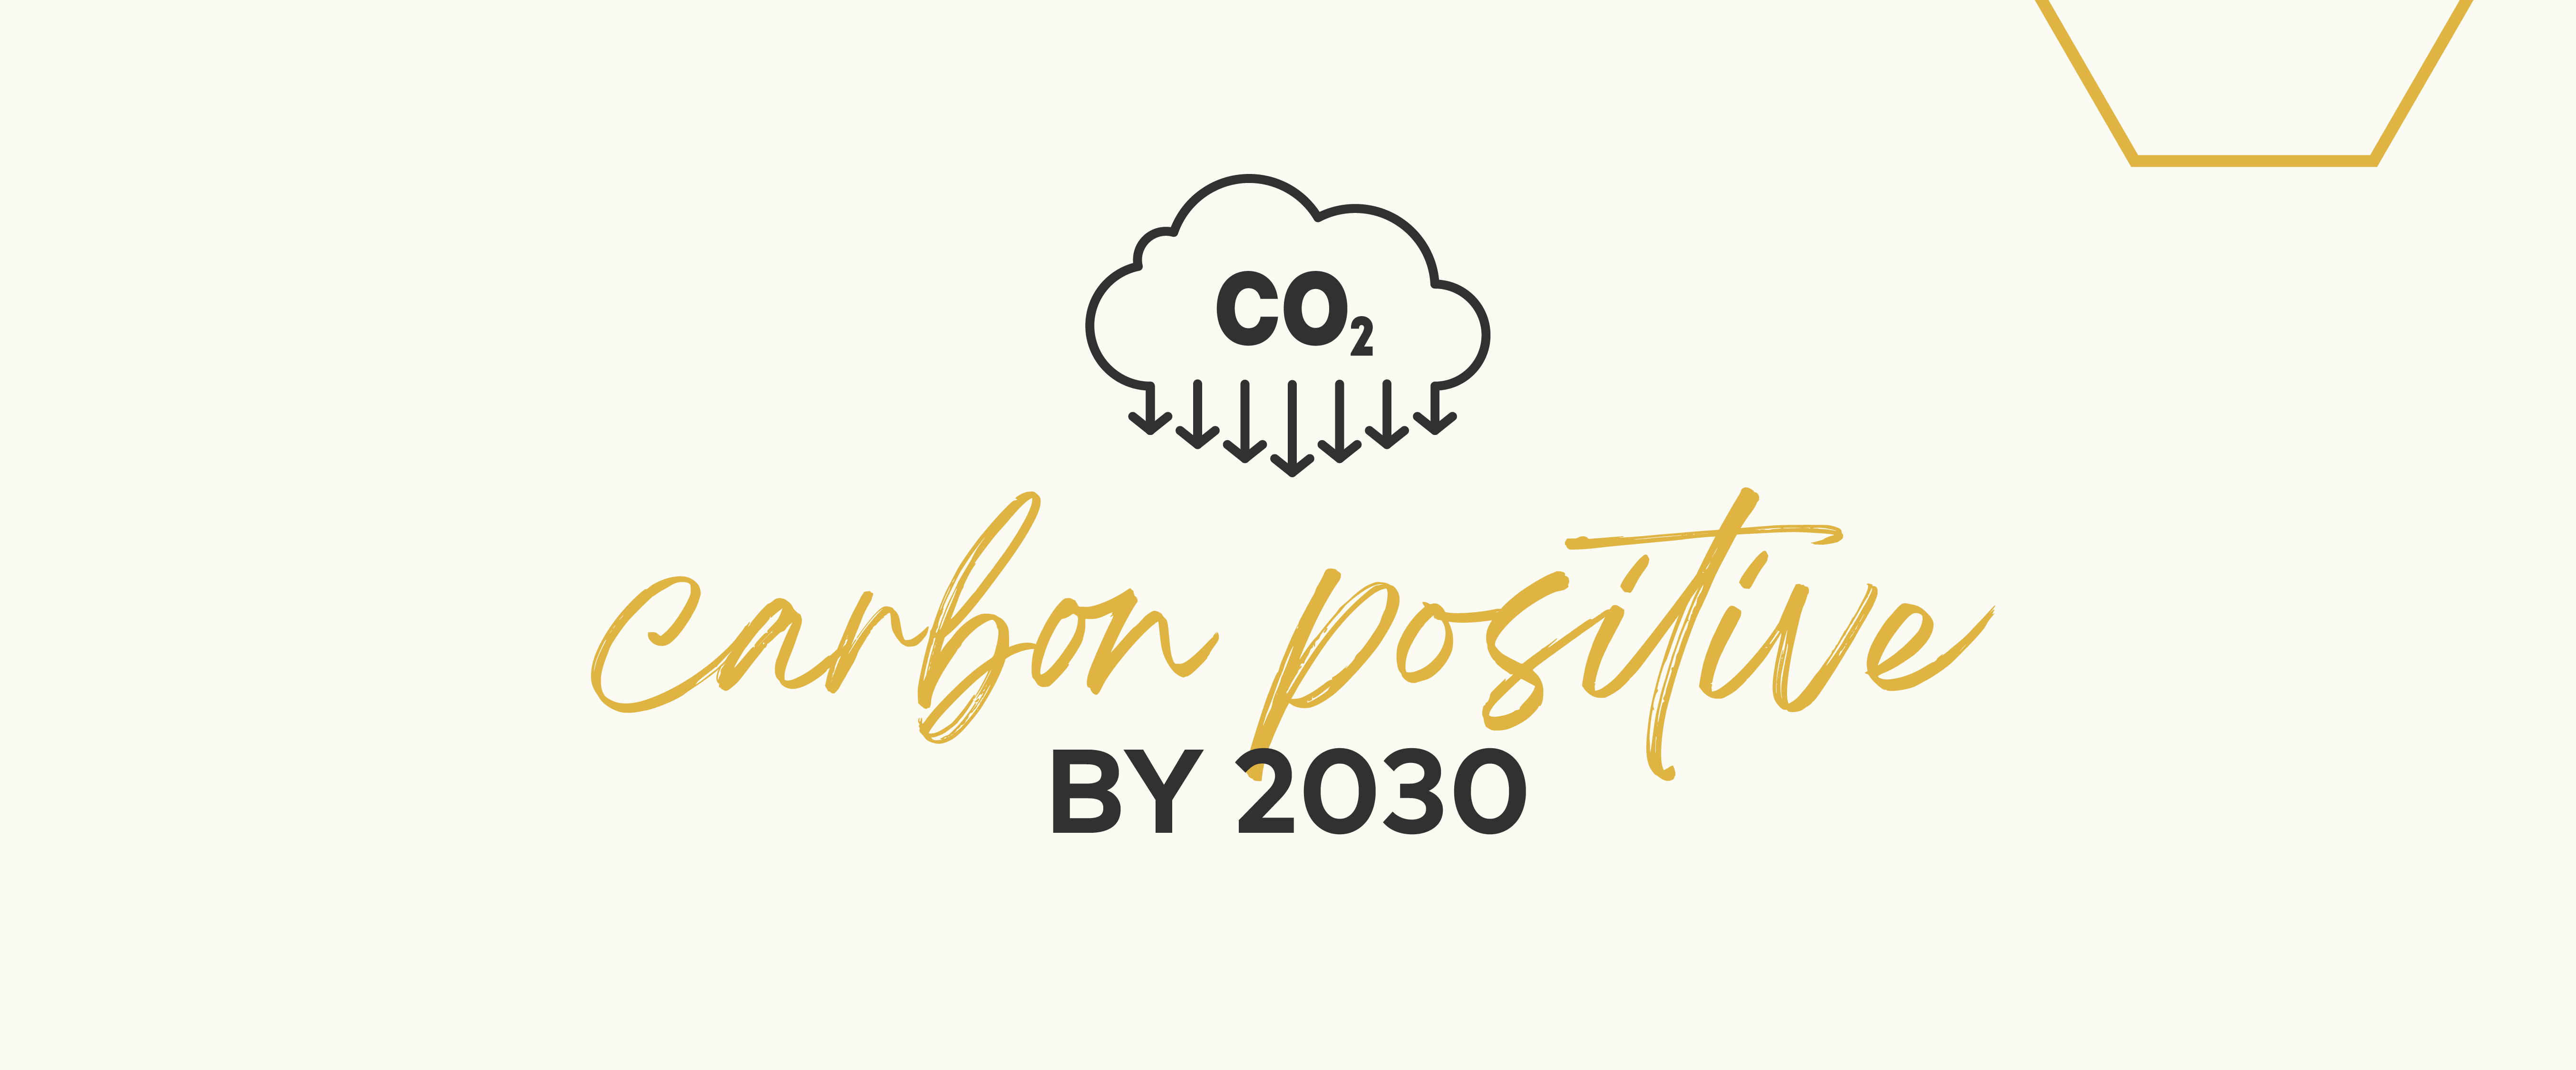 Carbon positive by 2030